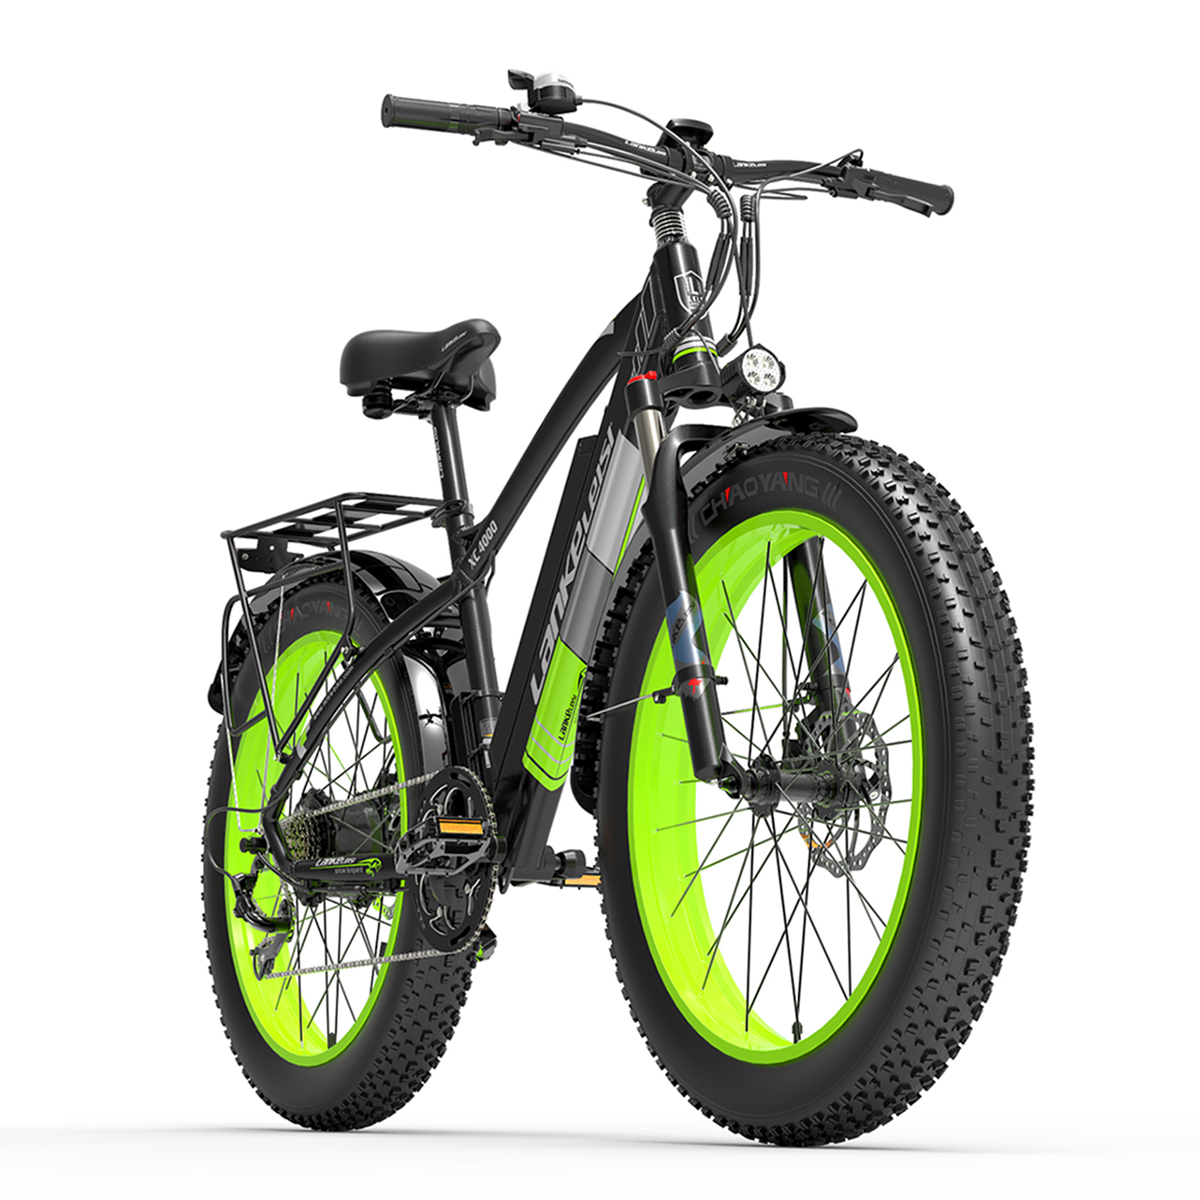 Find EU Direct LANKELEISI XC4000 14 5Ah 48V 1000W Electric Bicycle 26 Inches 100 120km Mileage Range Max Load 200kg for Sale on Gipsybee.com with cryptocurrencies